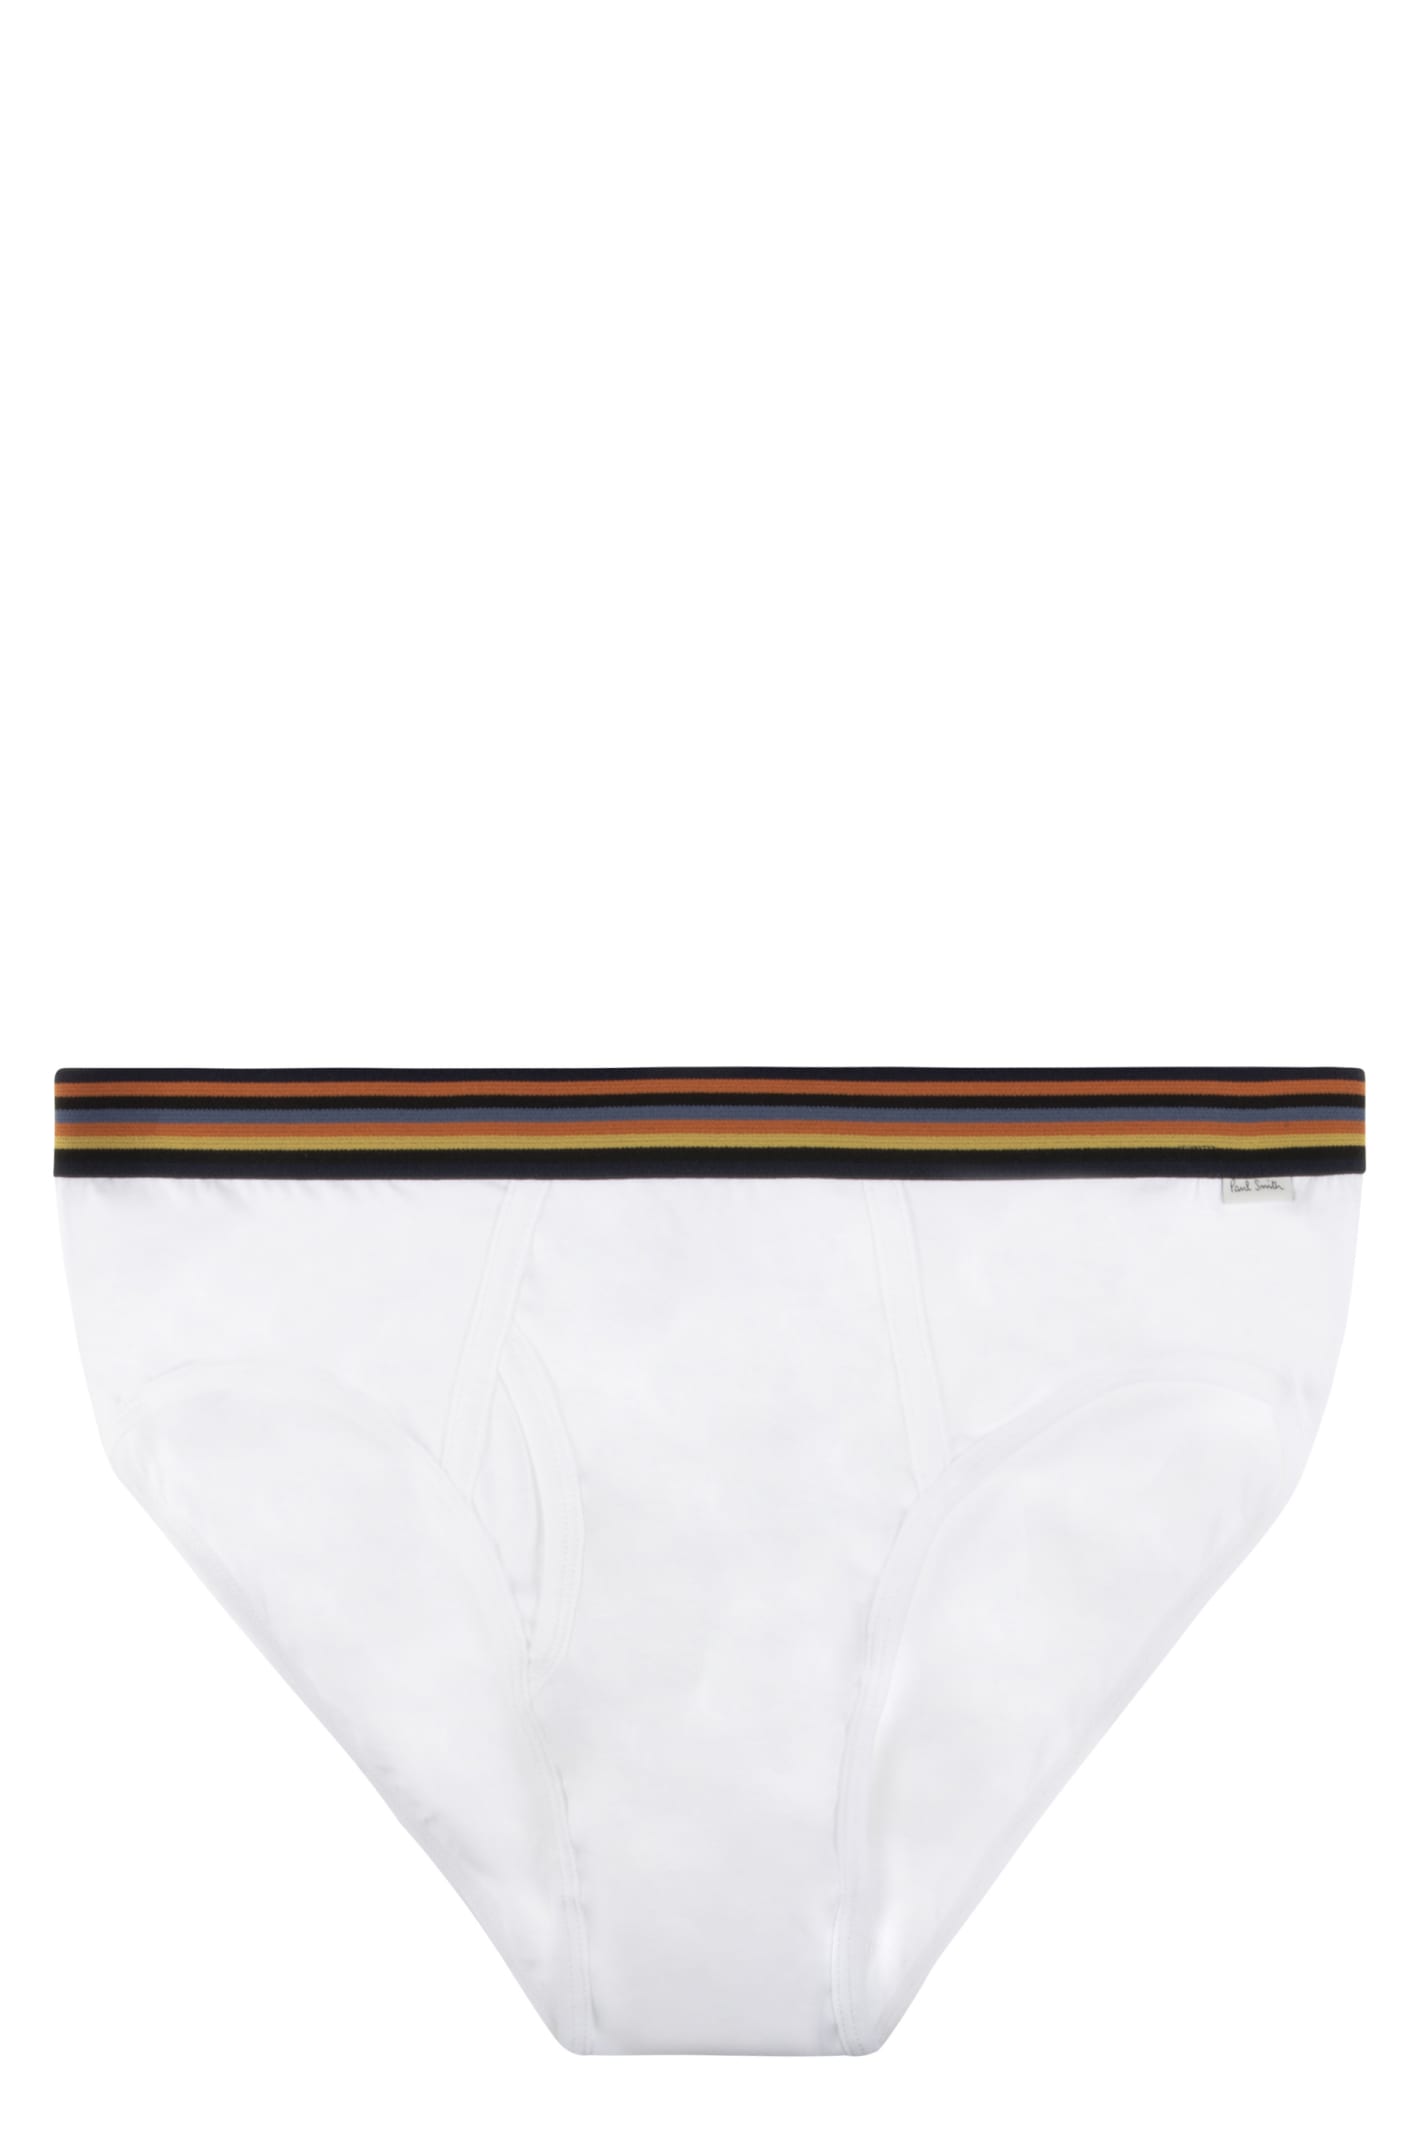 Paul Smith Artist Stripe Cotton Briefs With Elastic Band In White